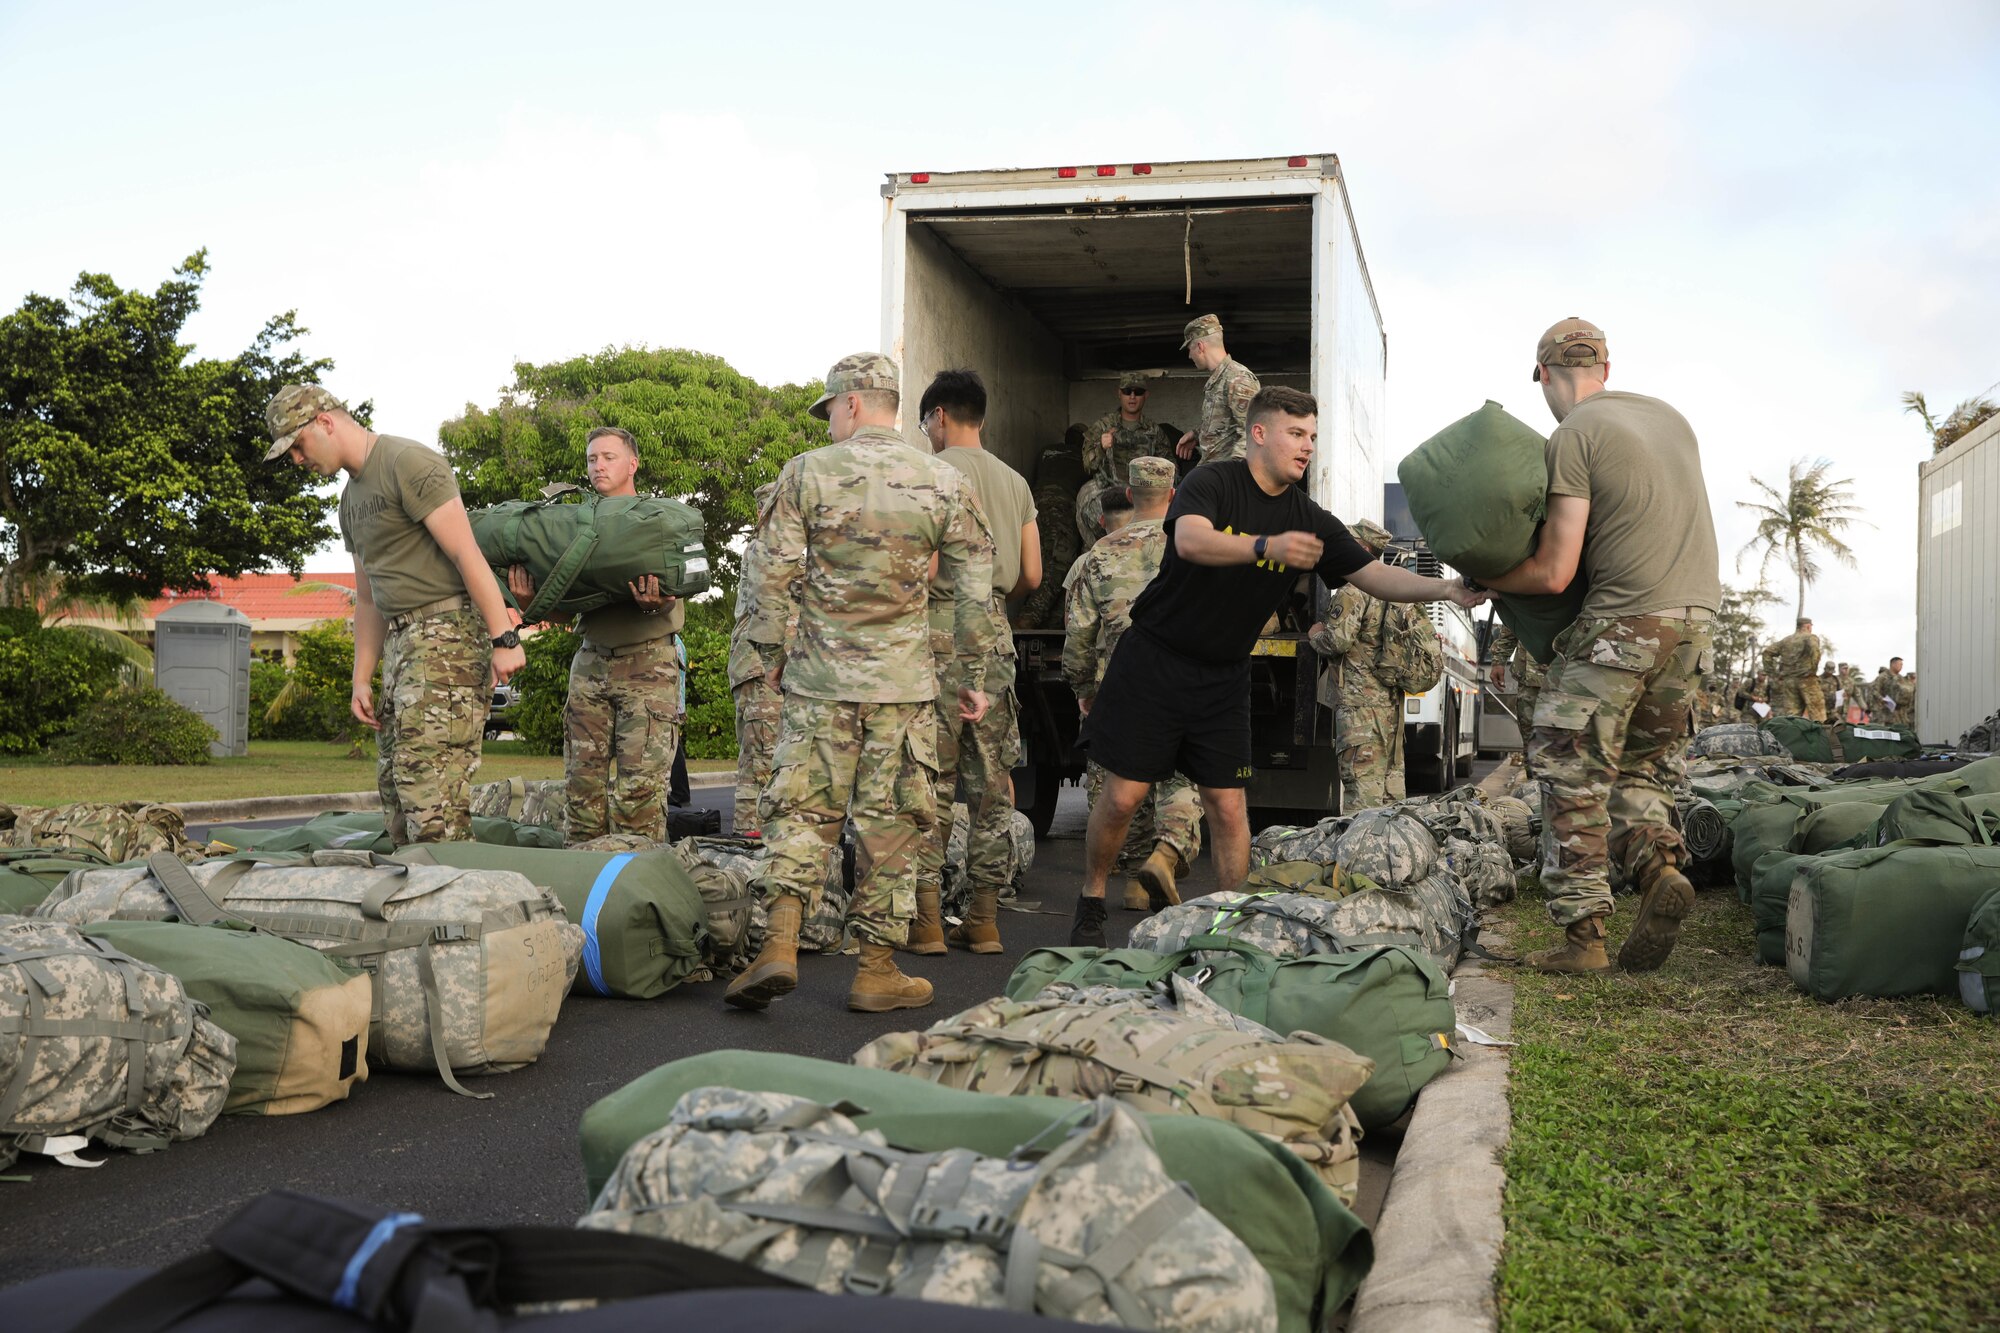 America’s First Corps Soldiers offload equipment for exercise Forager 21 at Anderson Air Force Base, Guam, July 10, 2021. Forager 21 bolsters the U.S. Army’s capability to rapidly deploy personnel and equipment in order to project power across a complex operational environment in the Pacific region. (U.S. Army photo by Sgt. David Resnick)